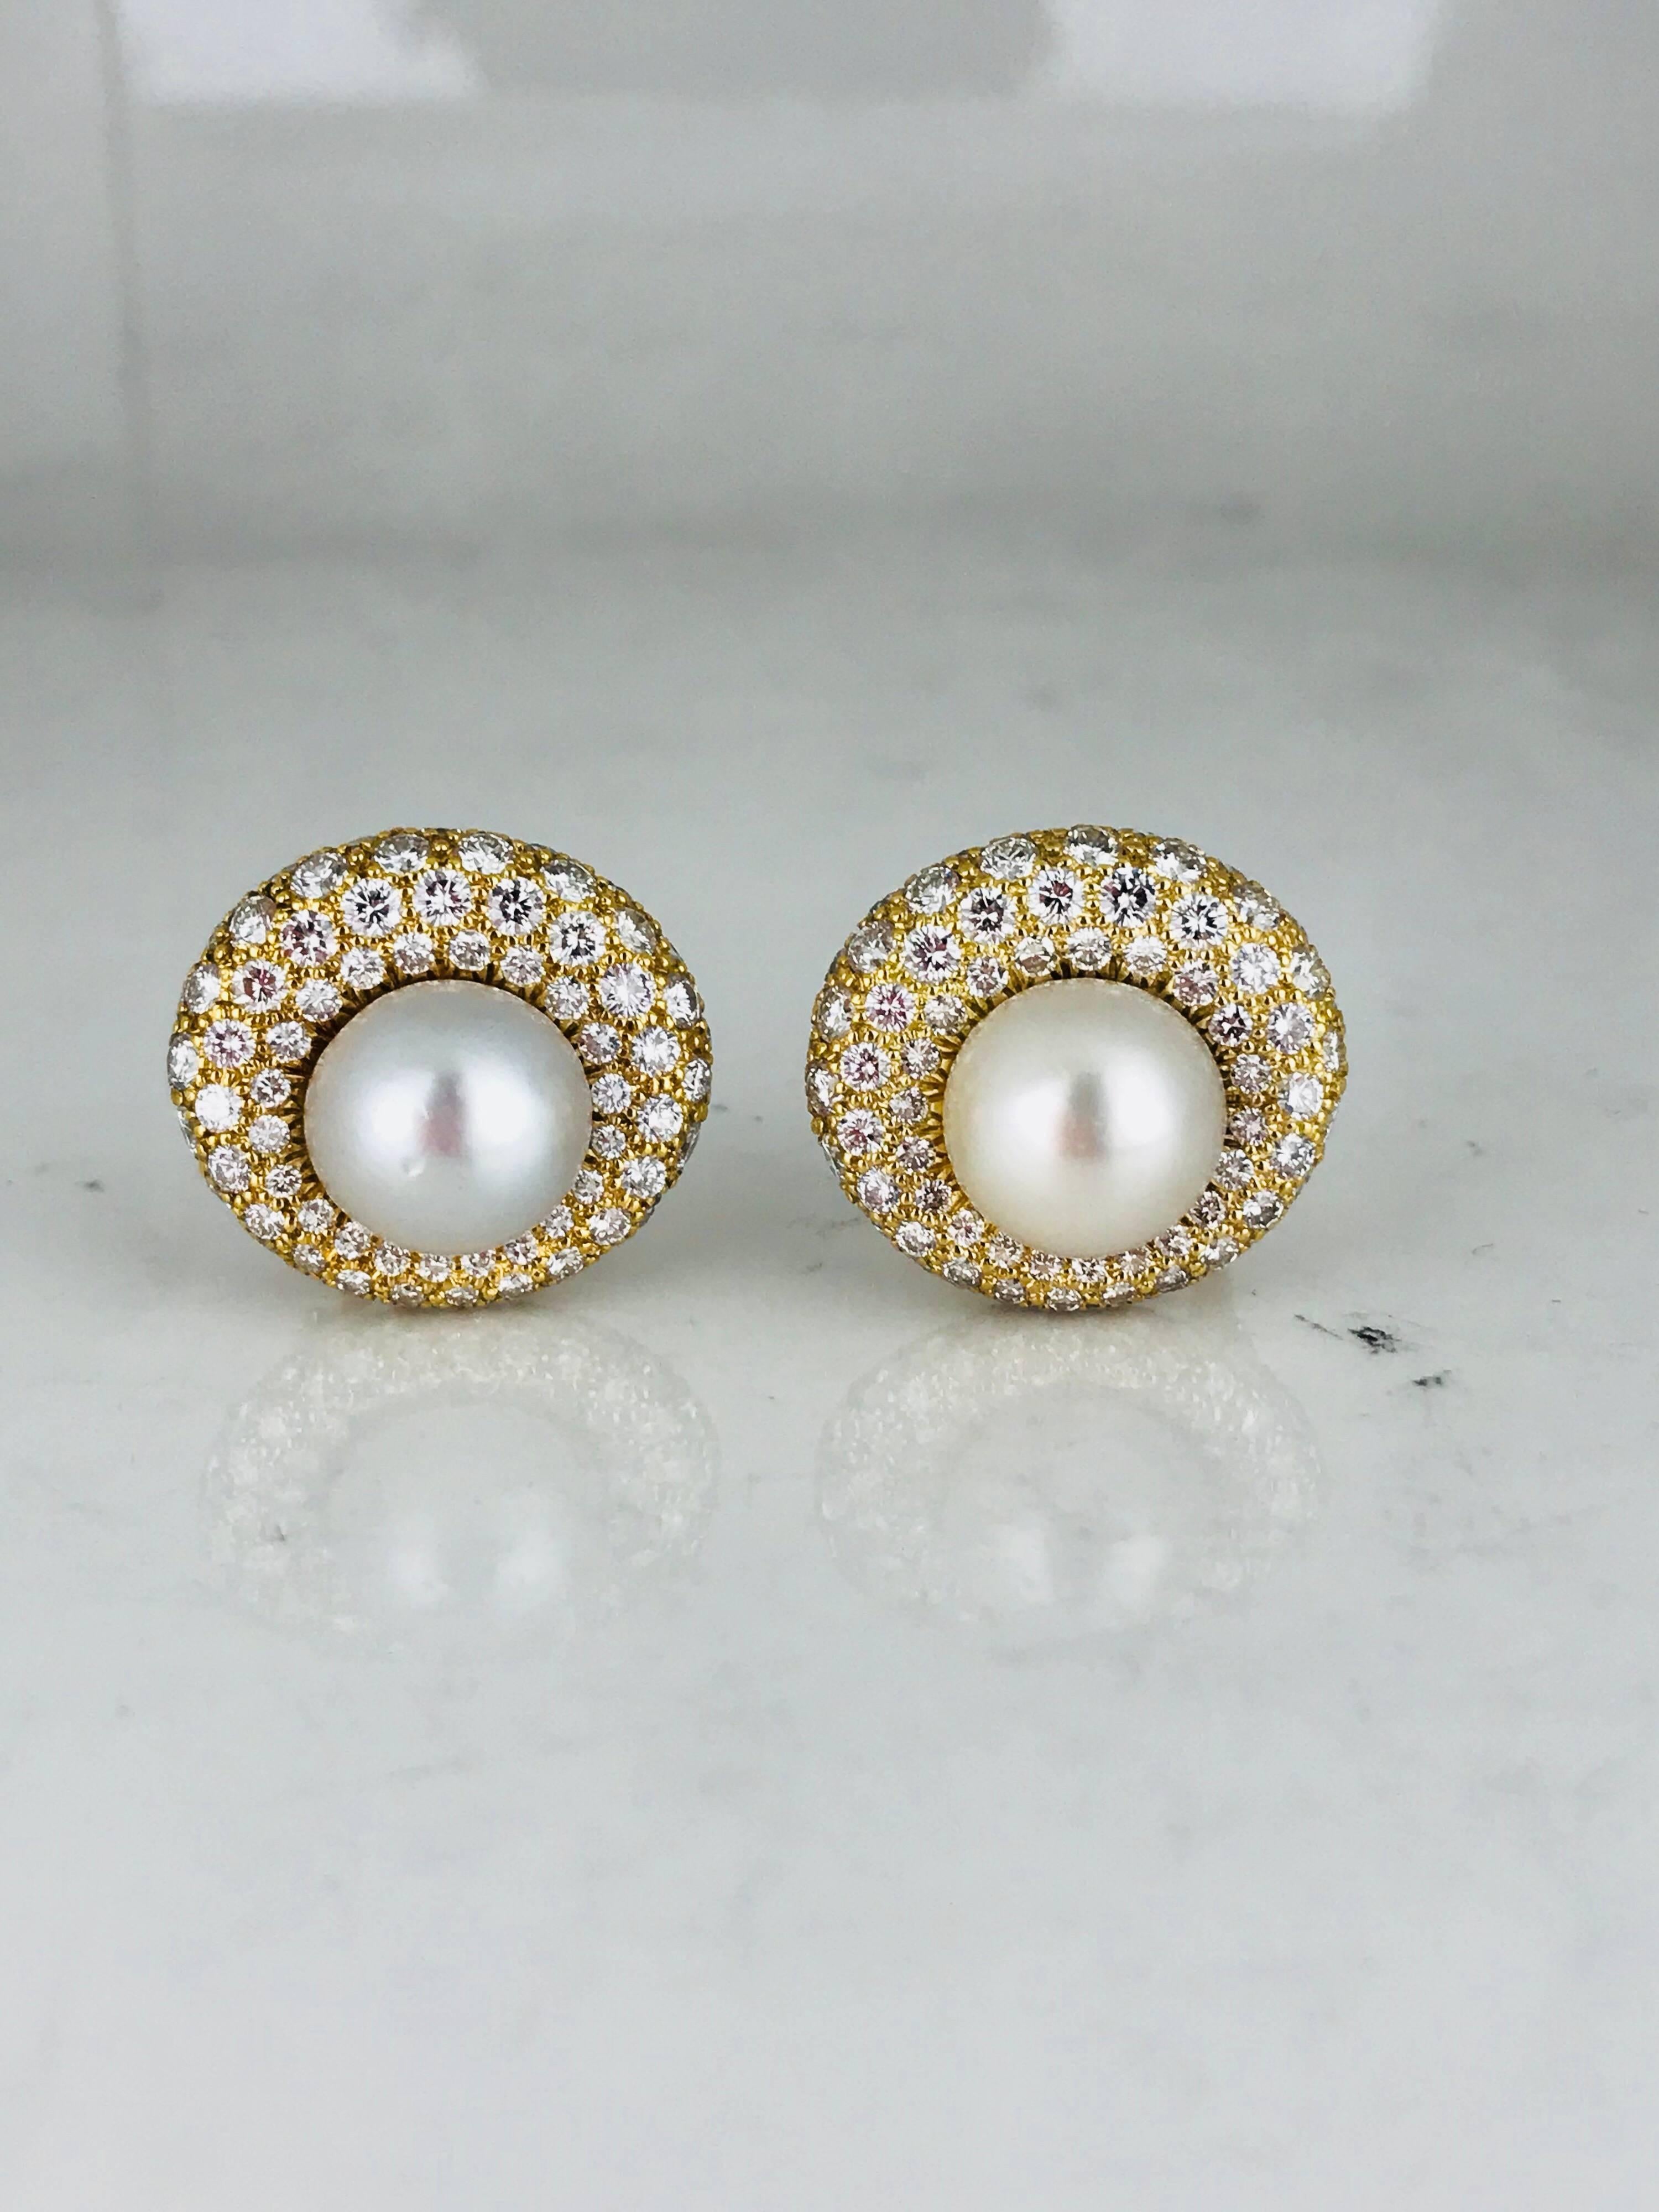 Stunning, 11-11.25  millimeter Pearls surrounded with diamond in a  pave setting. These Reto and timeless earrings feature a fine, high lustered 11-1.25 millimeter center South Sea pearl. 
The  setting is curved as the diamonds are set to wrap down